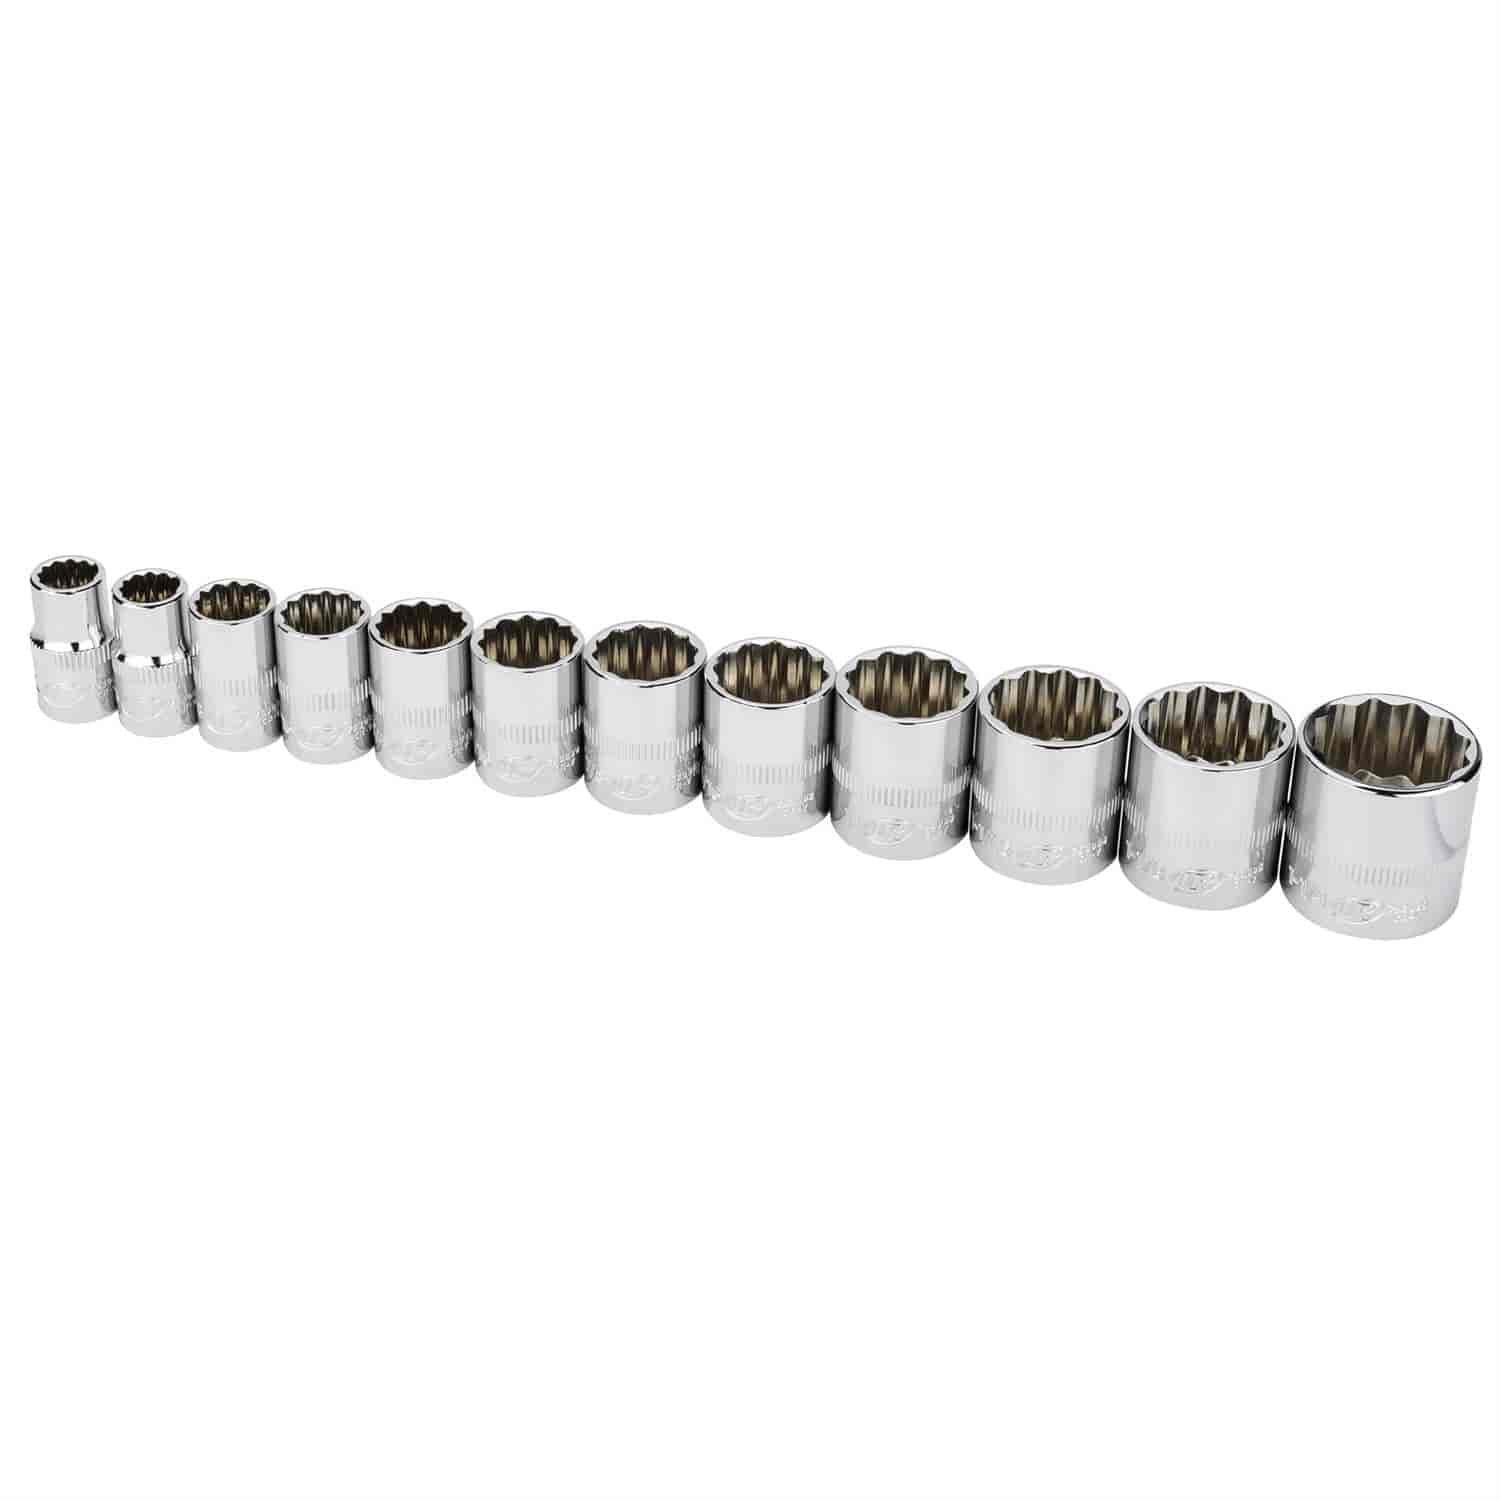 12-Piece 1/2 in. Drive Shallow SAE Socket Set